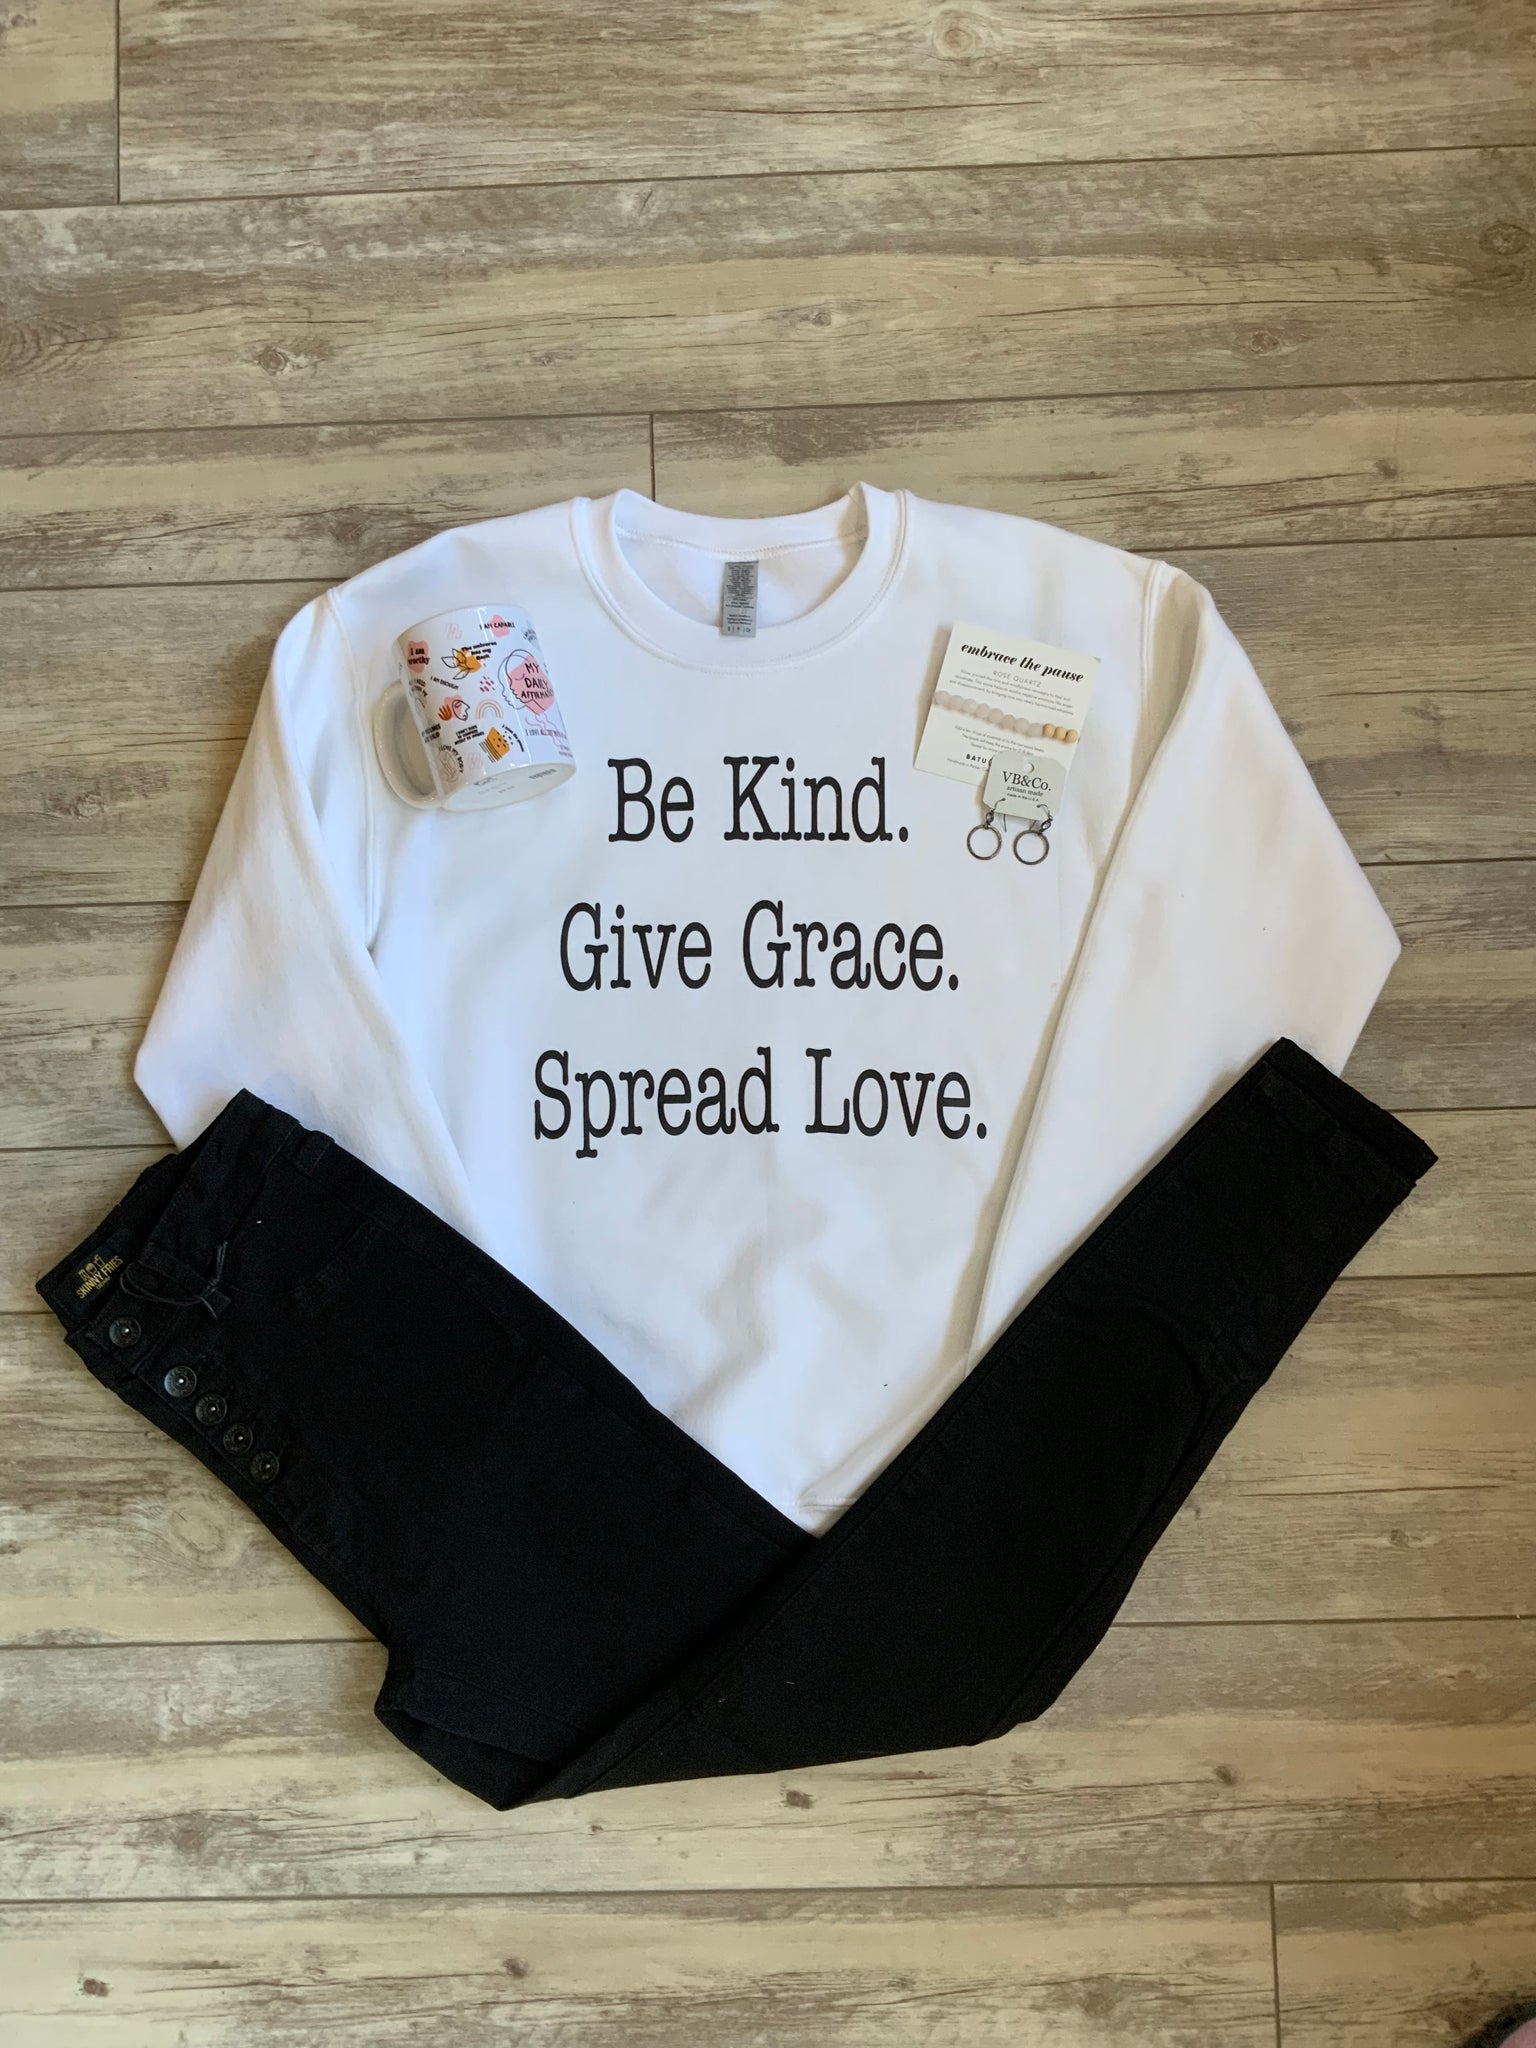 Be Kind. Give Grace. Spread Love.